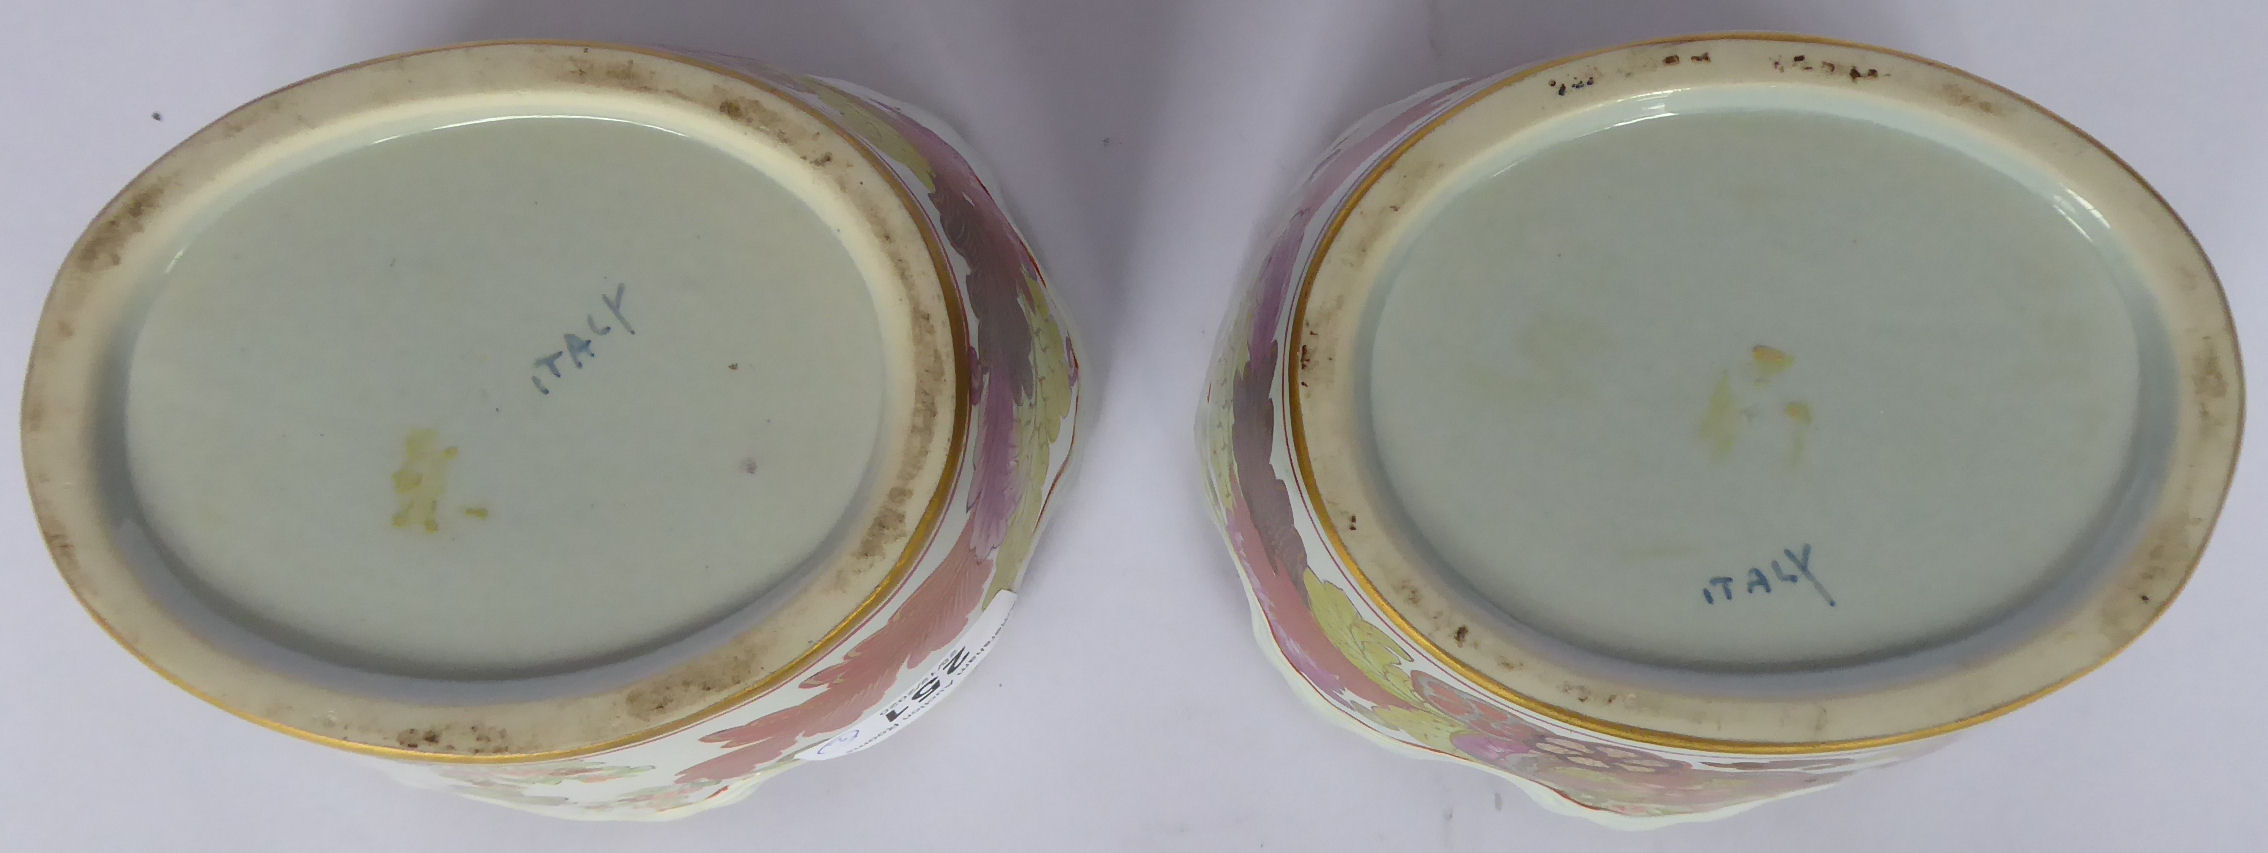 A pair of early 20thC Italian pottery Monteith design oval bowls, - Image 8 of 8